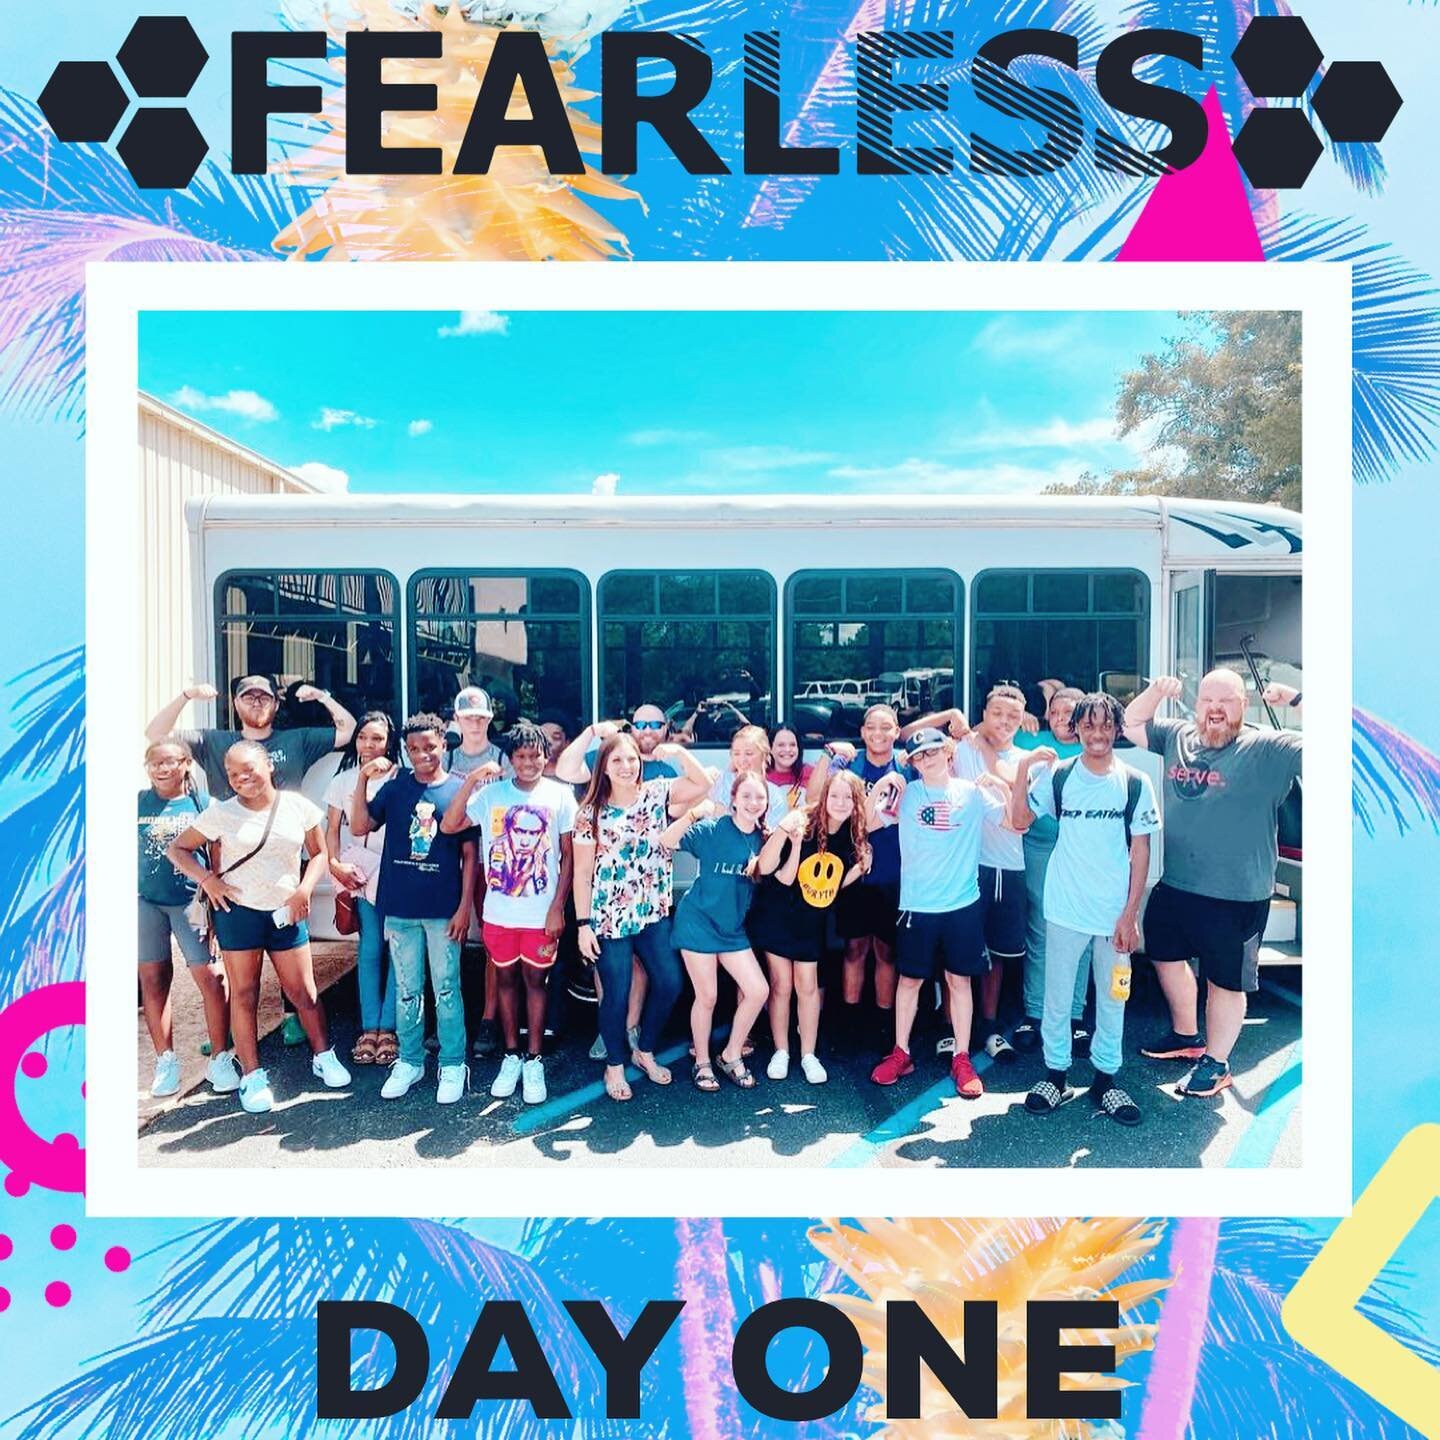 CAMP DAY 1 IS IN THE BAG!
Wow, God showed out during tonight&rsquo;s service. 

Students set free from shame &amp; guilt, &amp; a powerful move of the Holy Spirit.

We&rsquo;re just getting started!
#refugexyouth #fearless